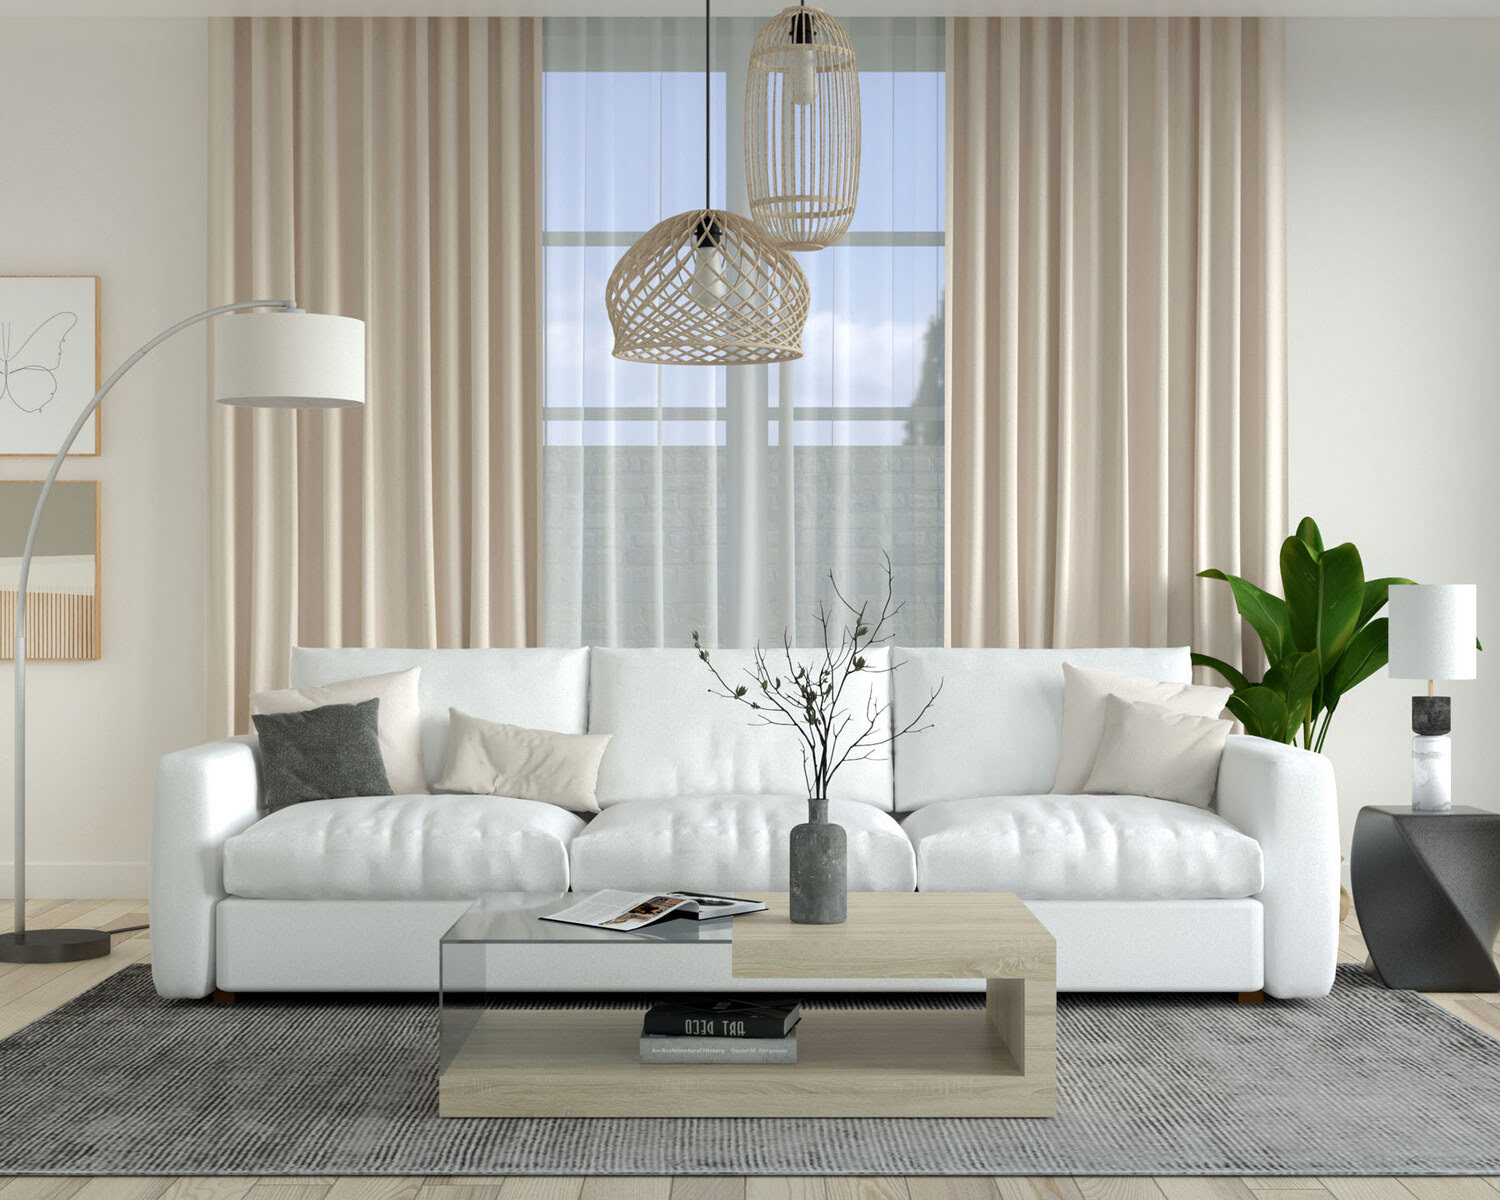 How To Choose A Curtain Color For Living Room